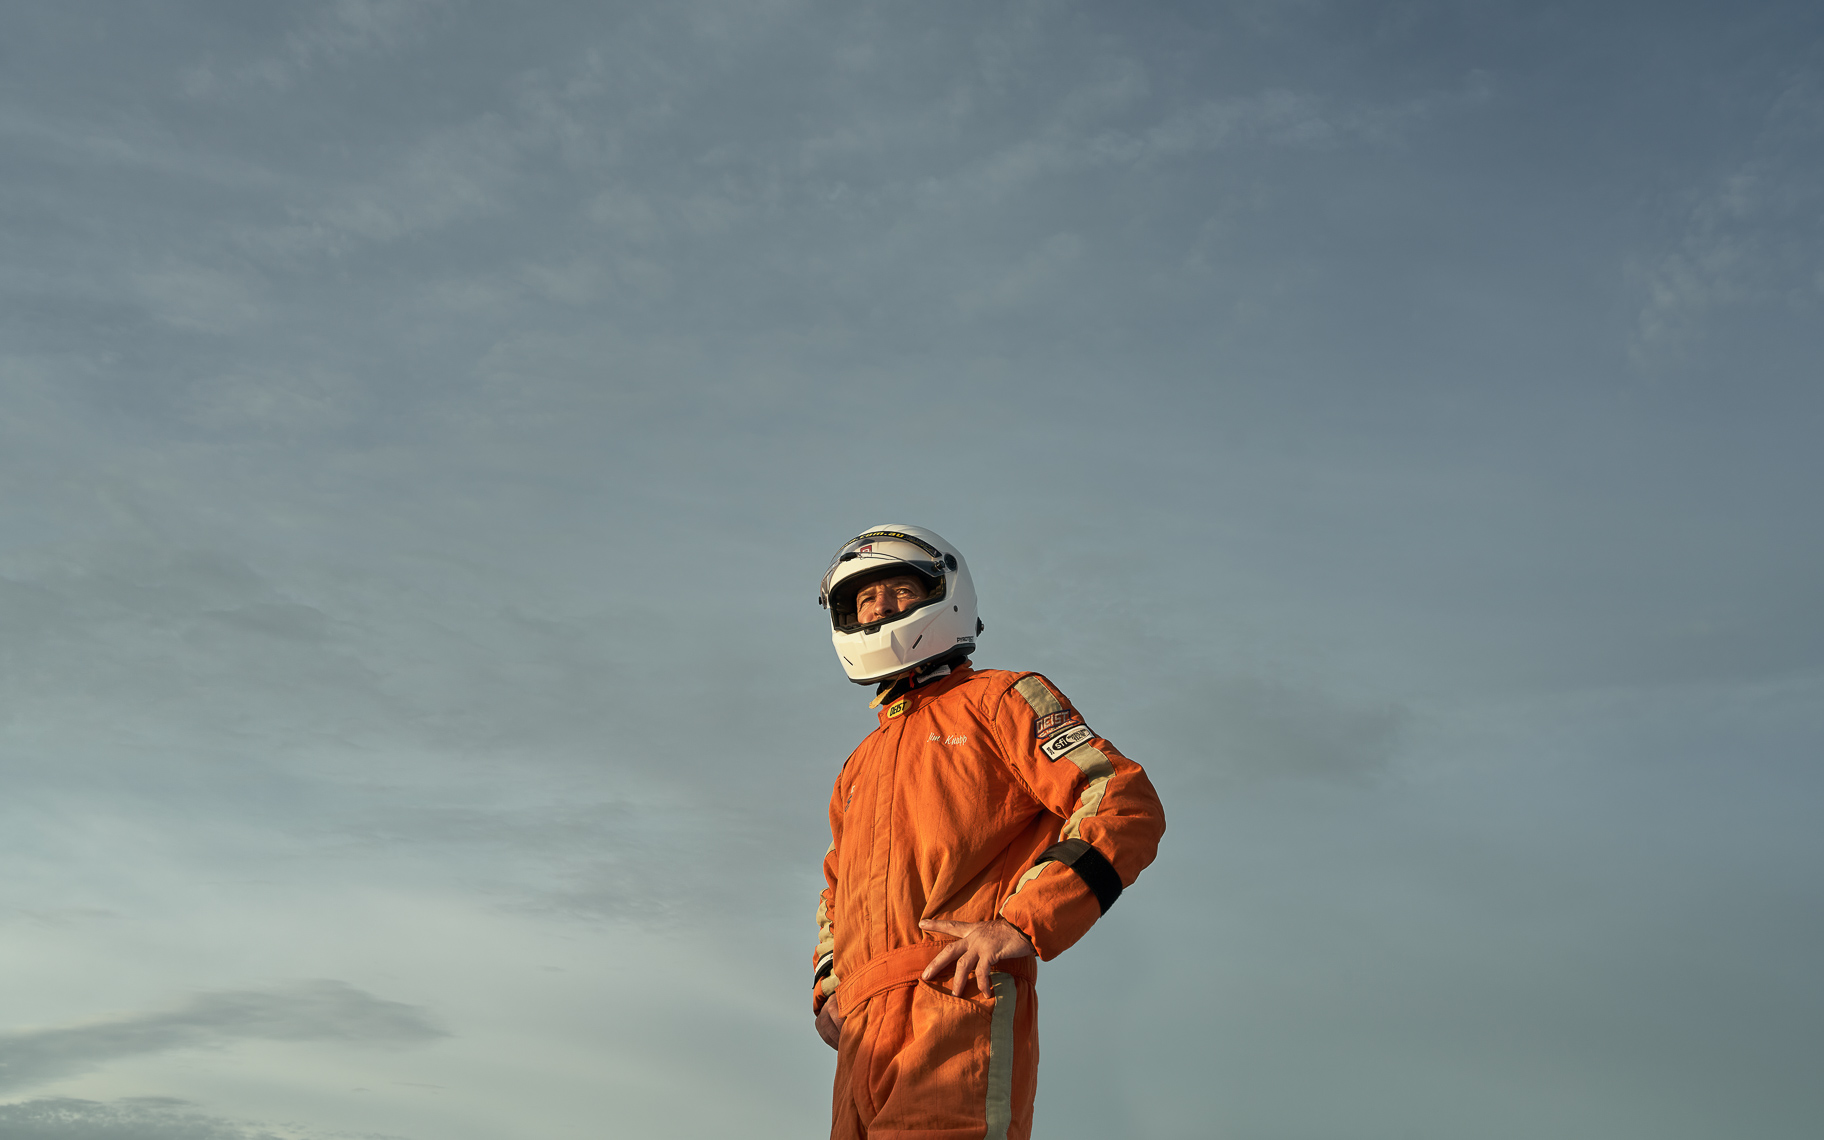 A person in an orange race suit looks into the distance